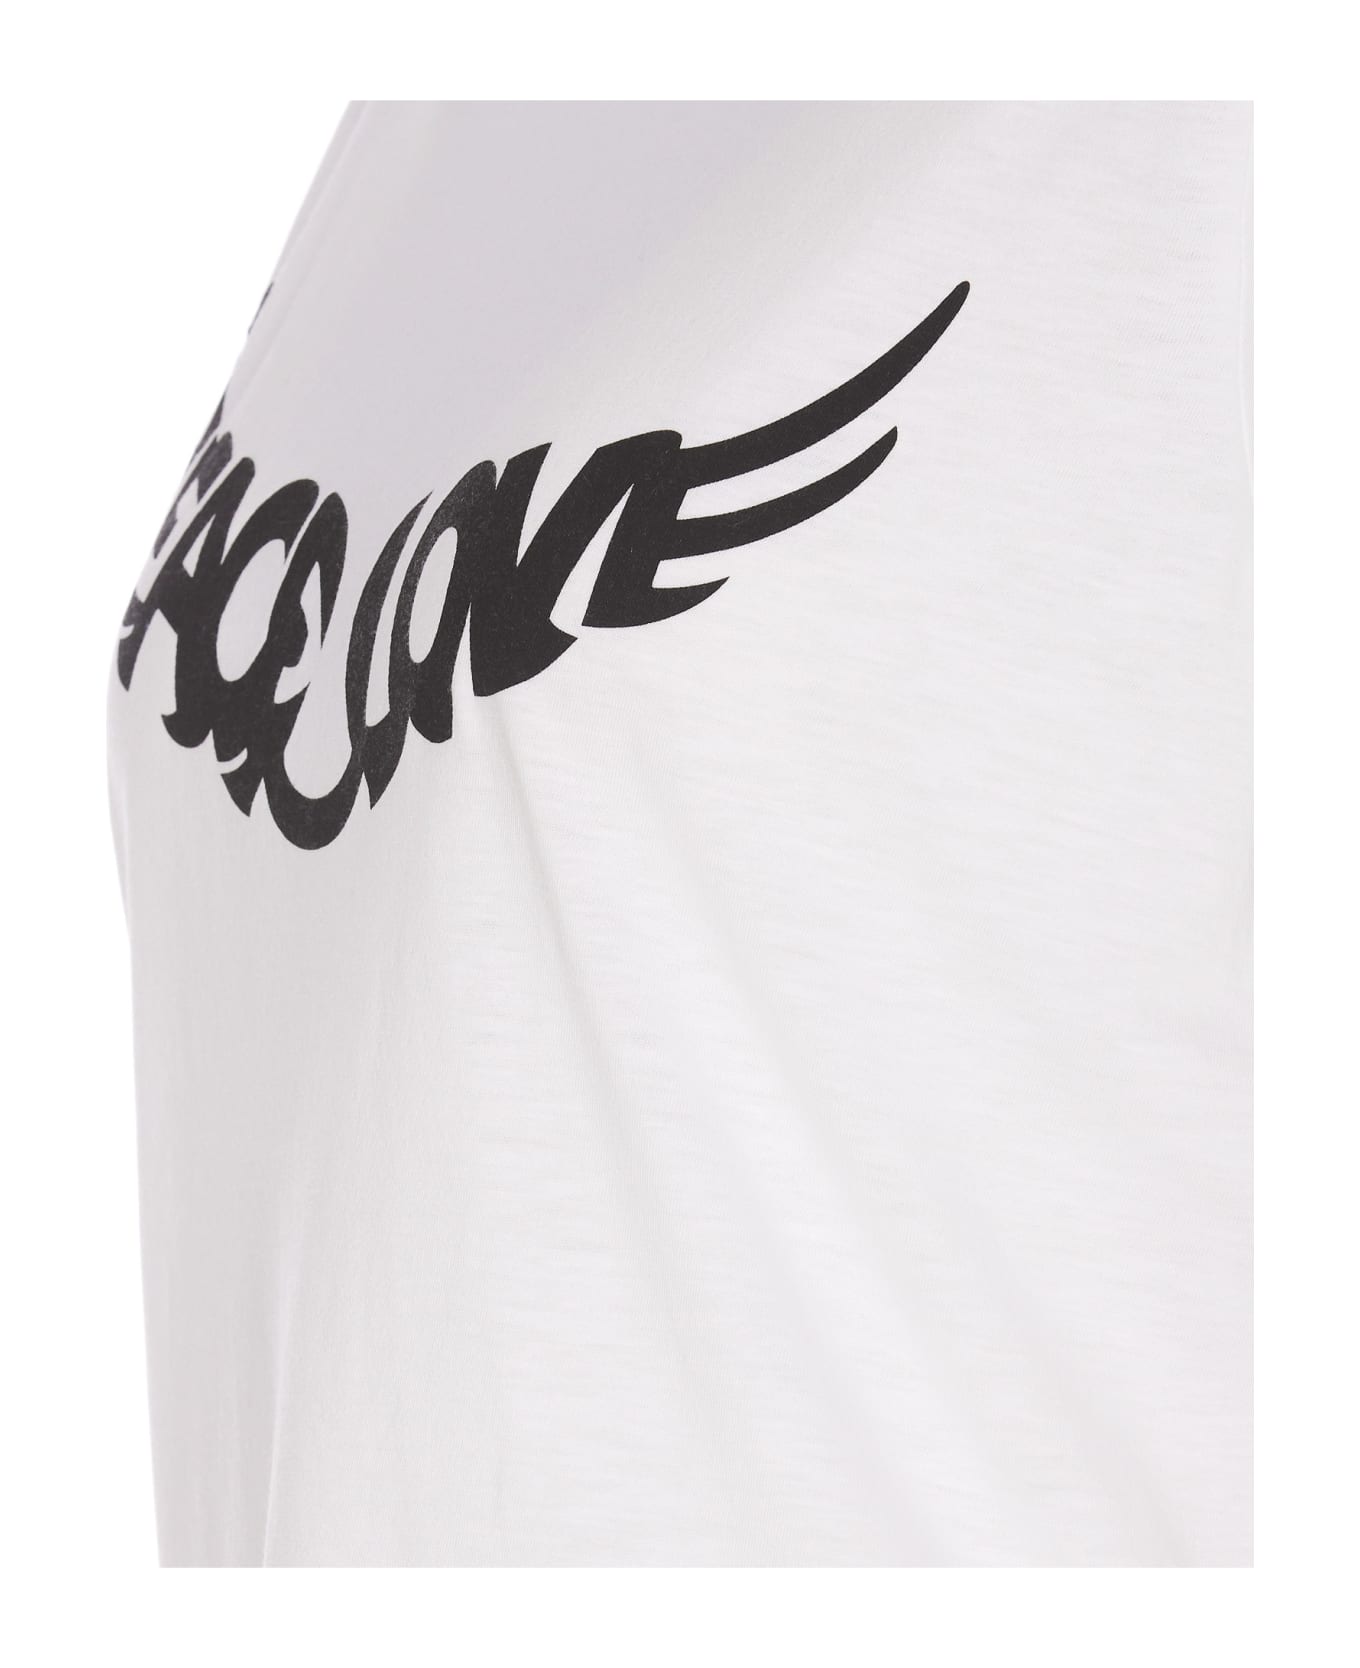 Zadig & Voltaire Woop Peace Love Wings T-shirt - White